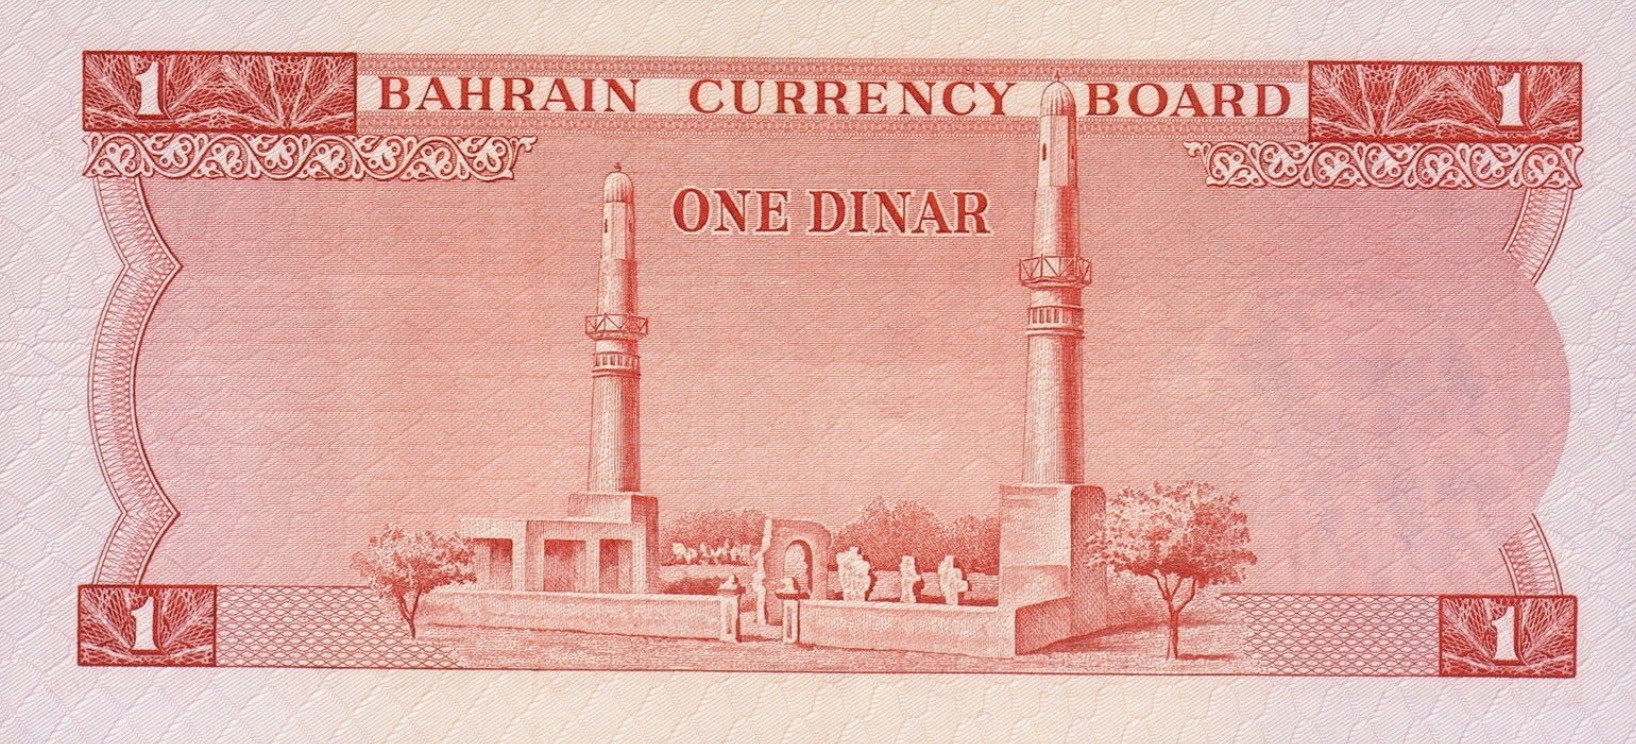 Bahrain Currency Board 1 Dinar banknote (First Issue)